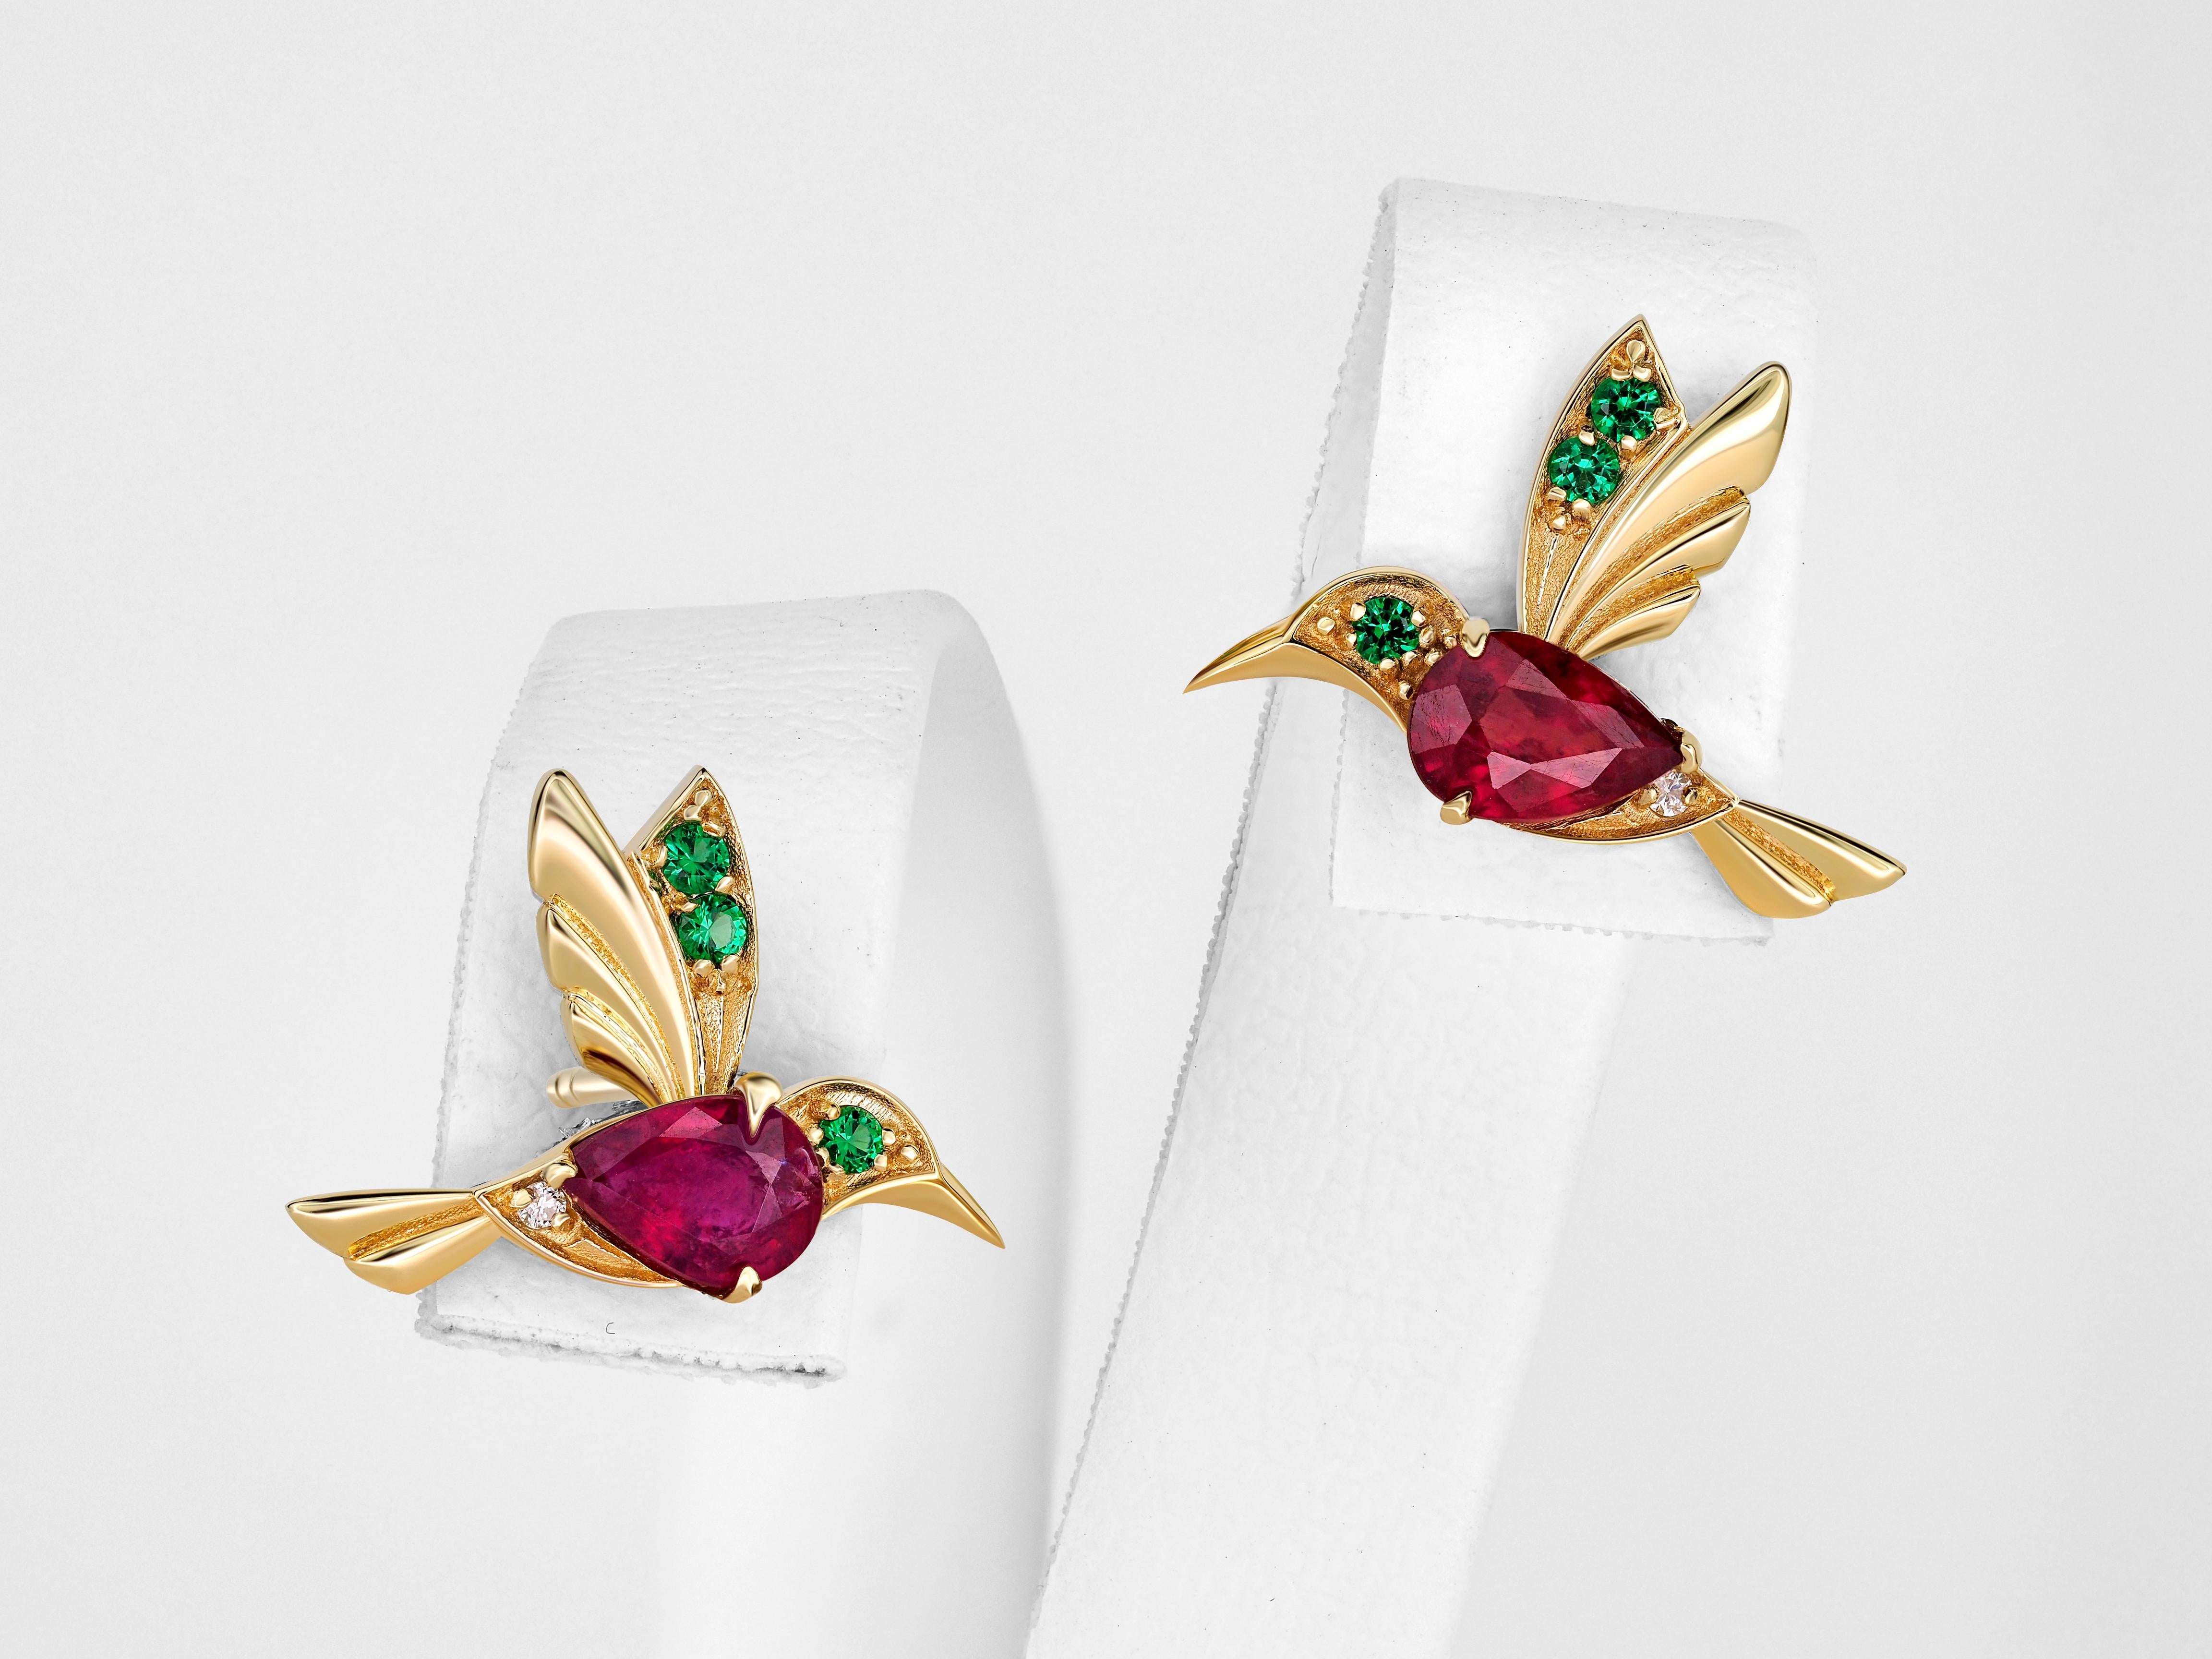 Hummingbird Stud Earrings with colored gemstone. 

We also have matching design pendant -  Ruby 14 karat gold pendant. Bird pendant with ruby. July birthstone pendant. We can done this design with similar gemstones.

Metal: 14 karat gold
Weight: